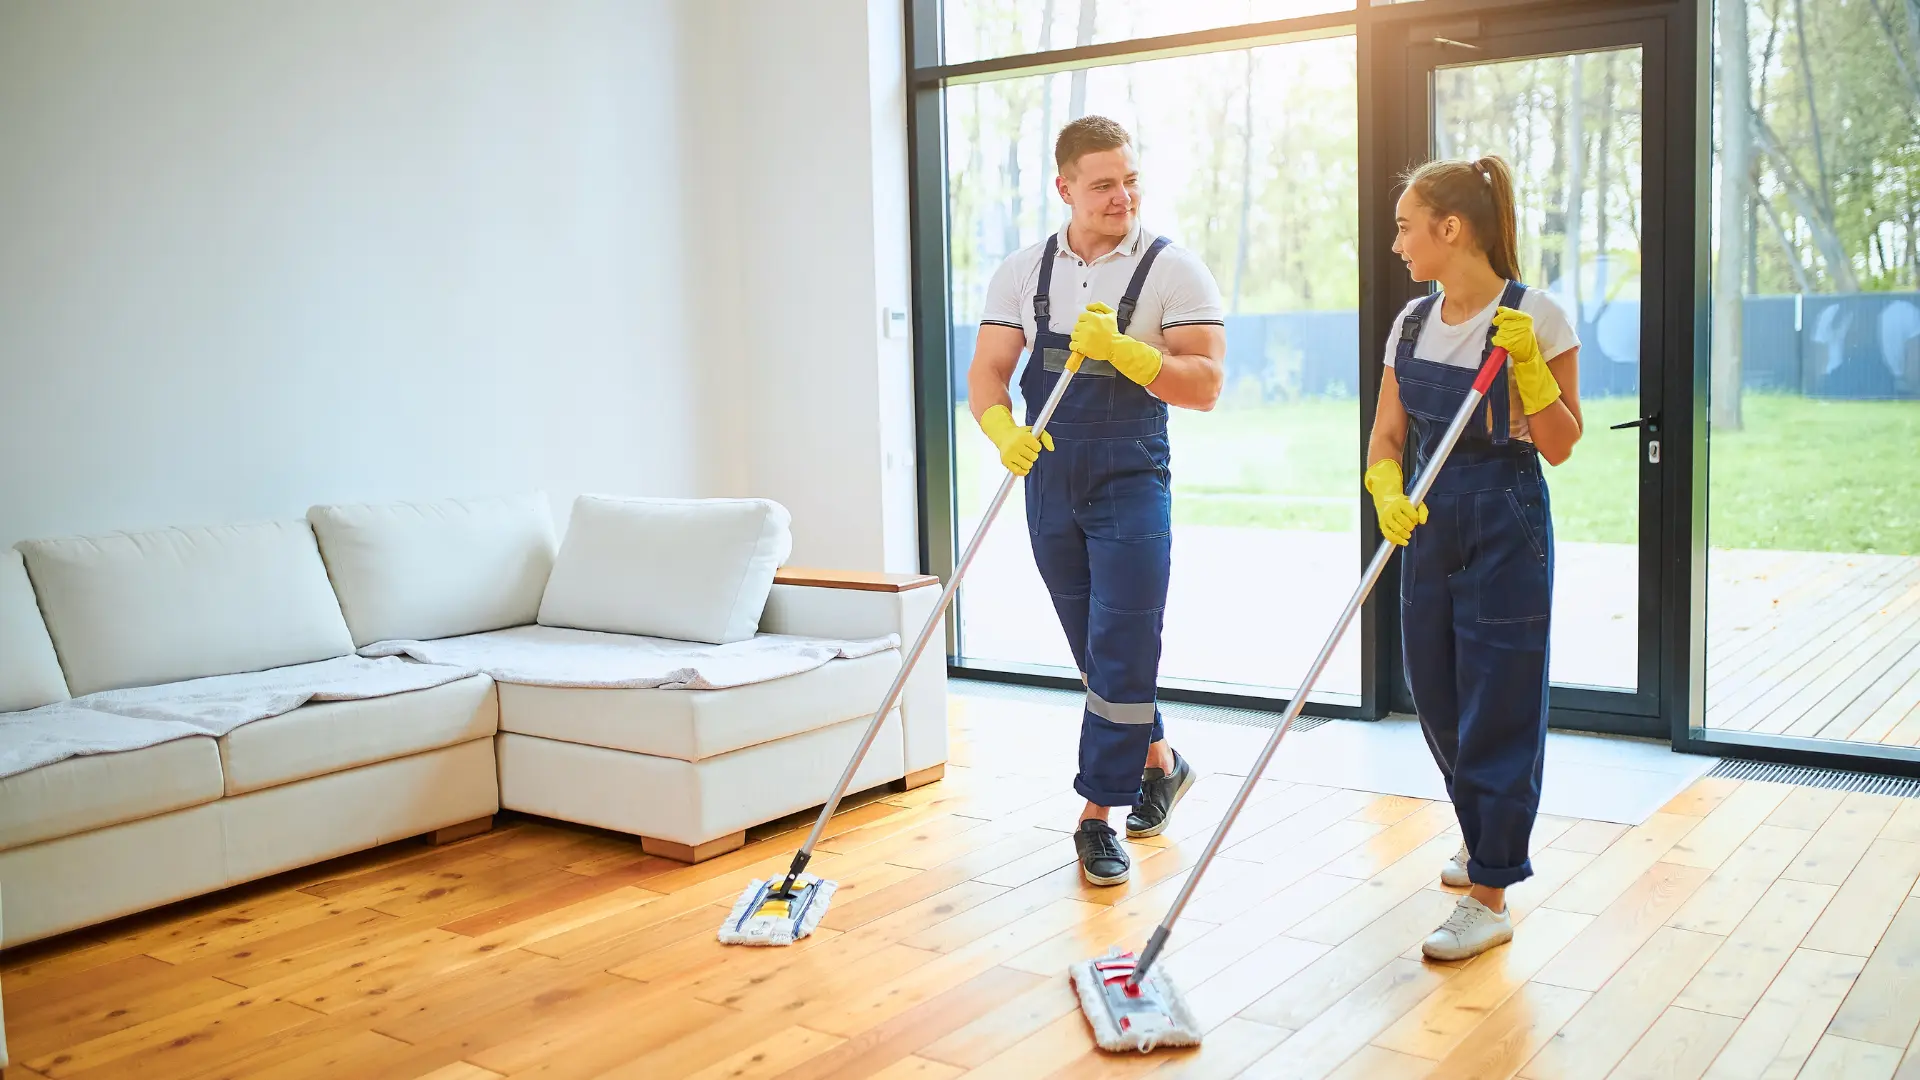 Cleaning services in NYC